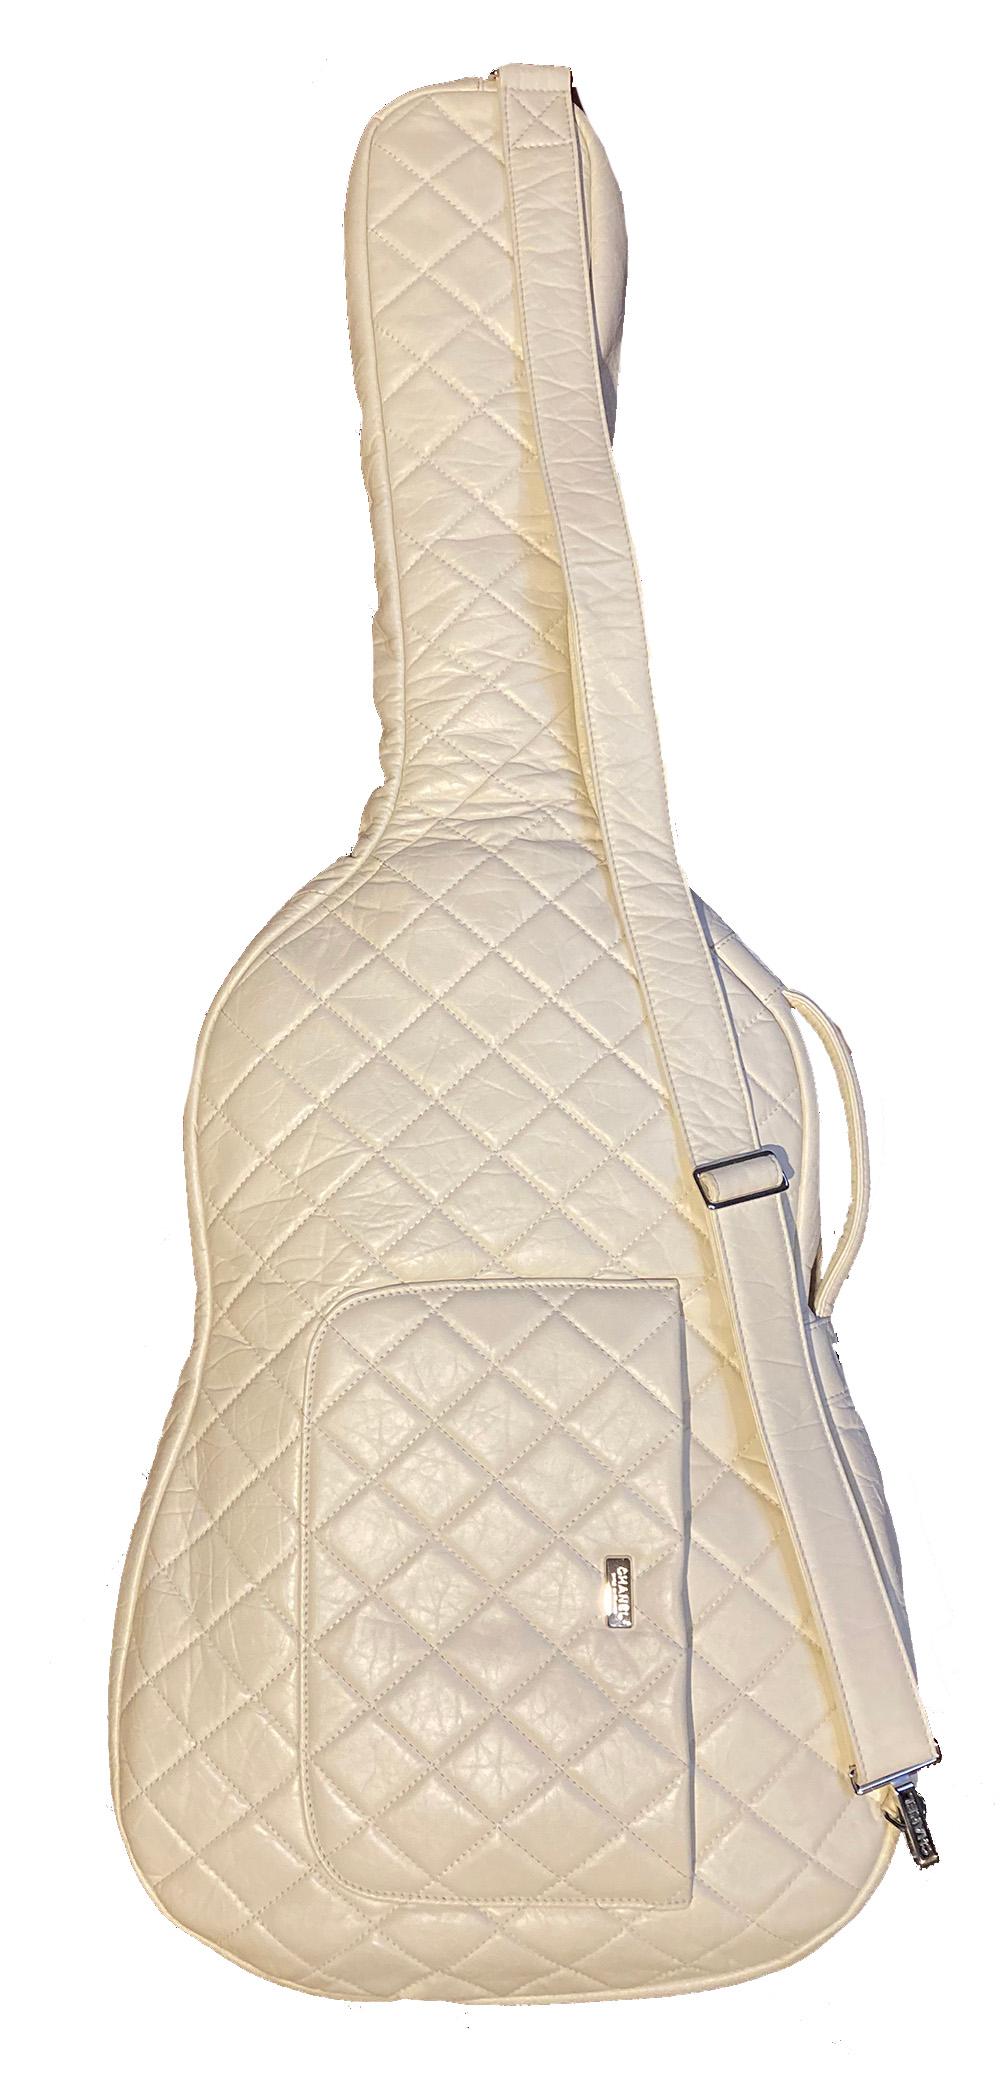 Rare Chanel white leather guitar case. excellent condition from spring 2009 runway show. cream quilted leather exterior with silver hardware and matching adjustable shoulder strap. front zip pouch pocket. Double zip closure opens to cream soft